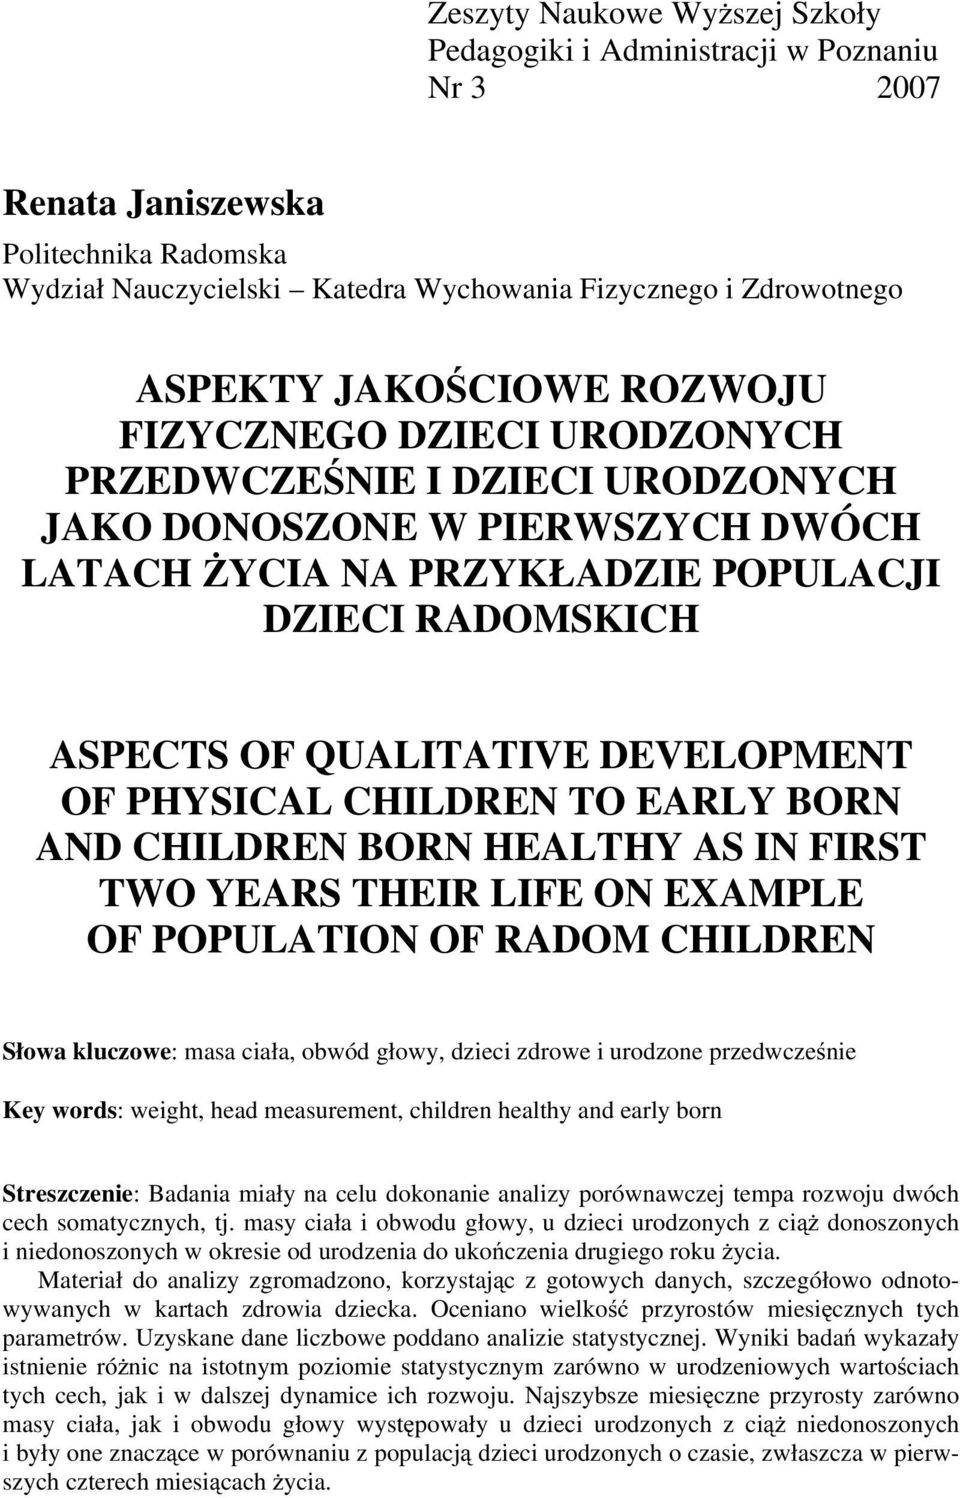 DEVELOPMENT OF PHYSICAL CHILDREN TO EARLY BORN AND CHILDREN BORN HEALTHY AS IN FIRST TWO YEARS THEIR LIFE ON EXAMPLE OF POPULATION OF RADOM CHILDREN Słowa kluczowe: masa ciała, obwód głowy, dzieci